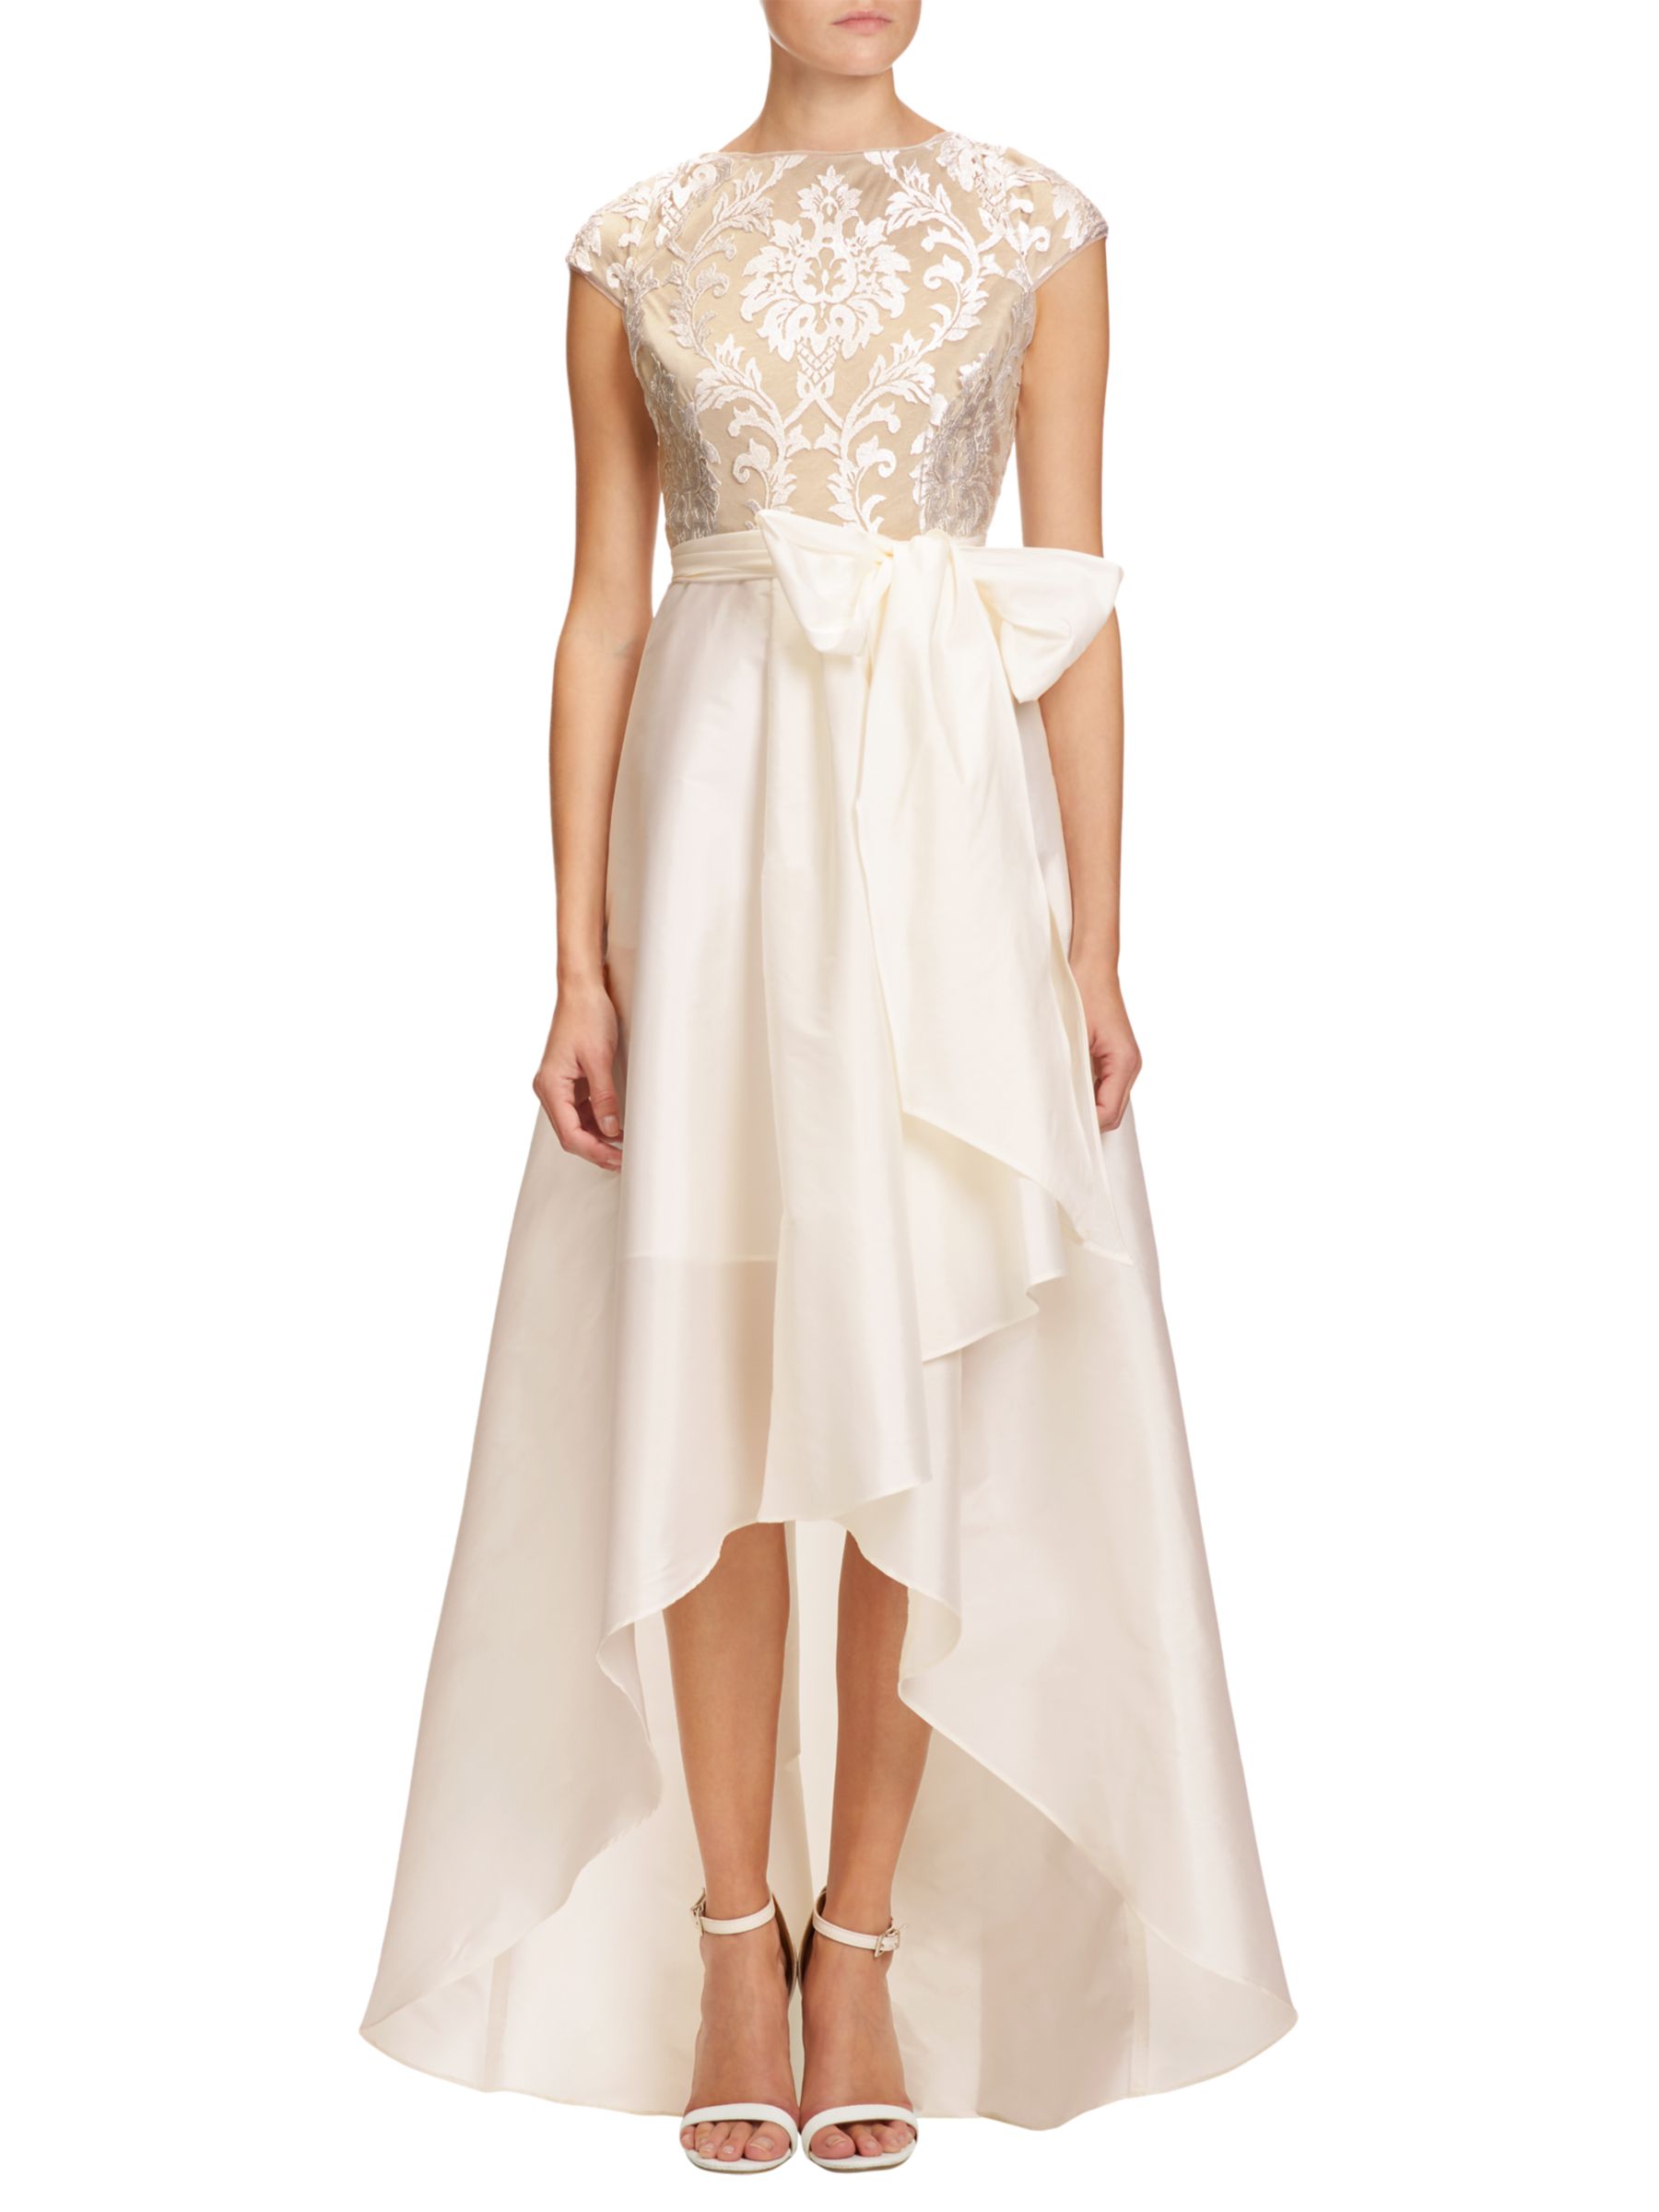 Adrianna Papell Emblem Embroidered Ball Gown, Ivory/Nude